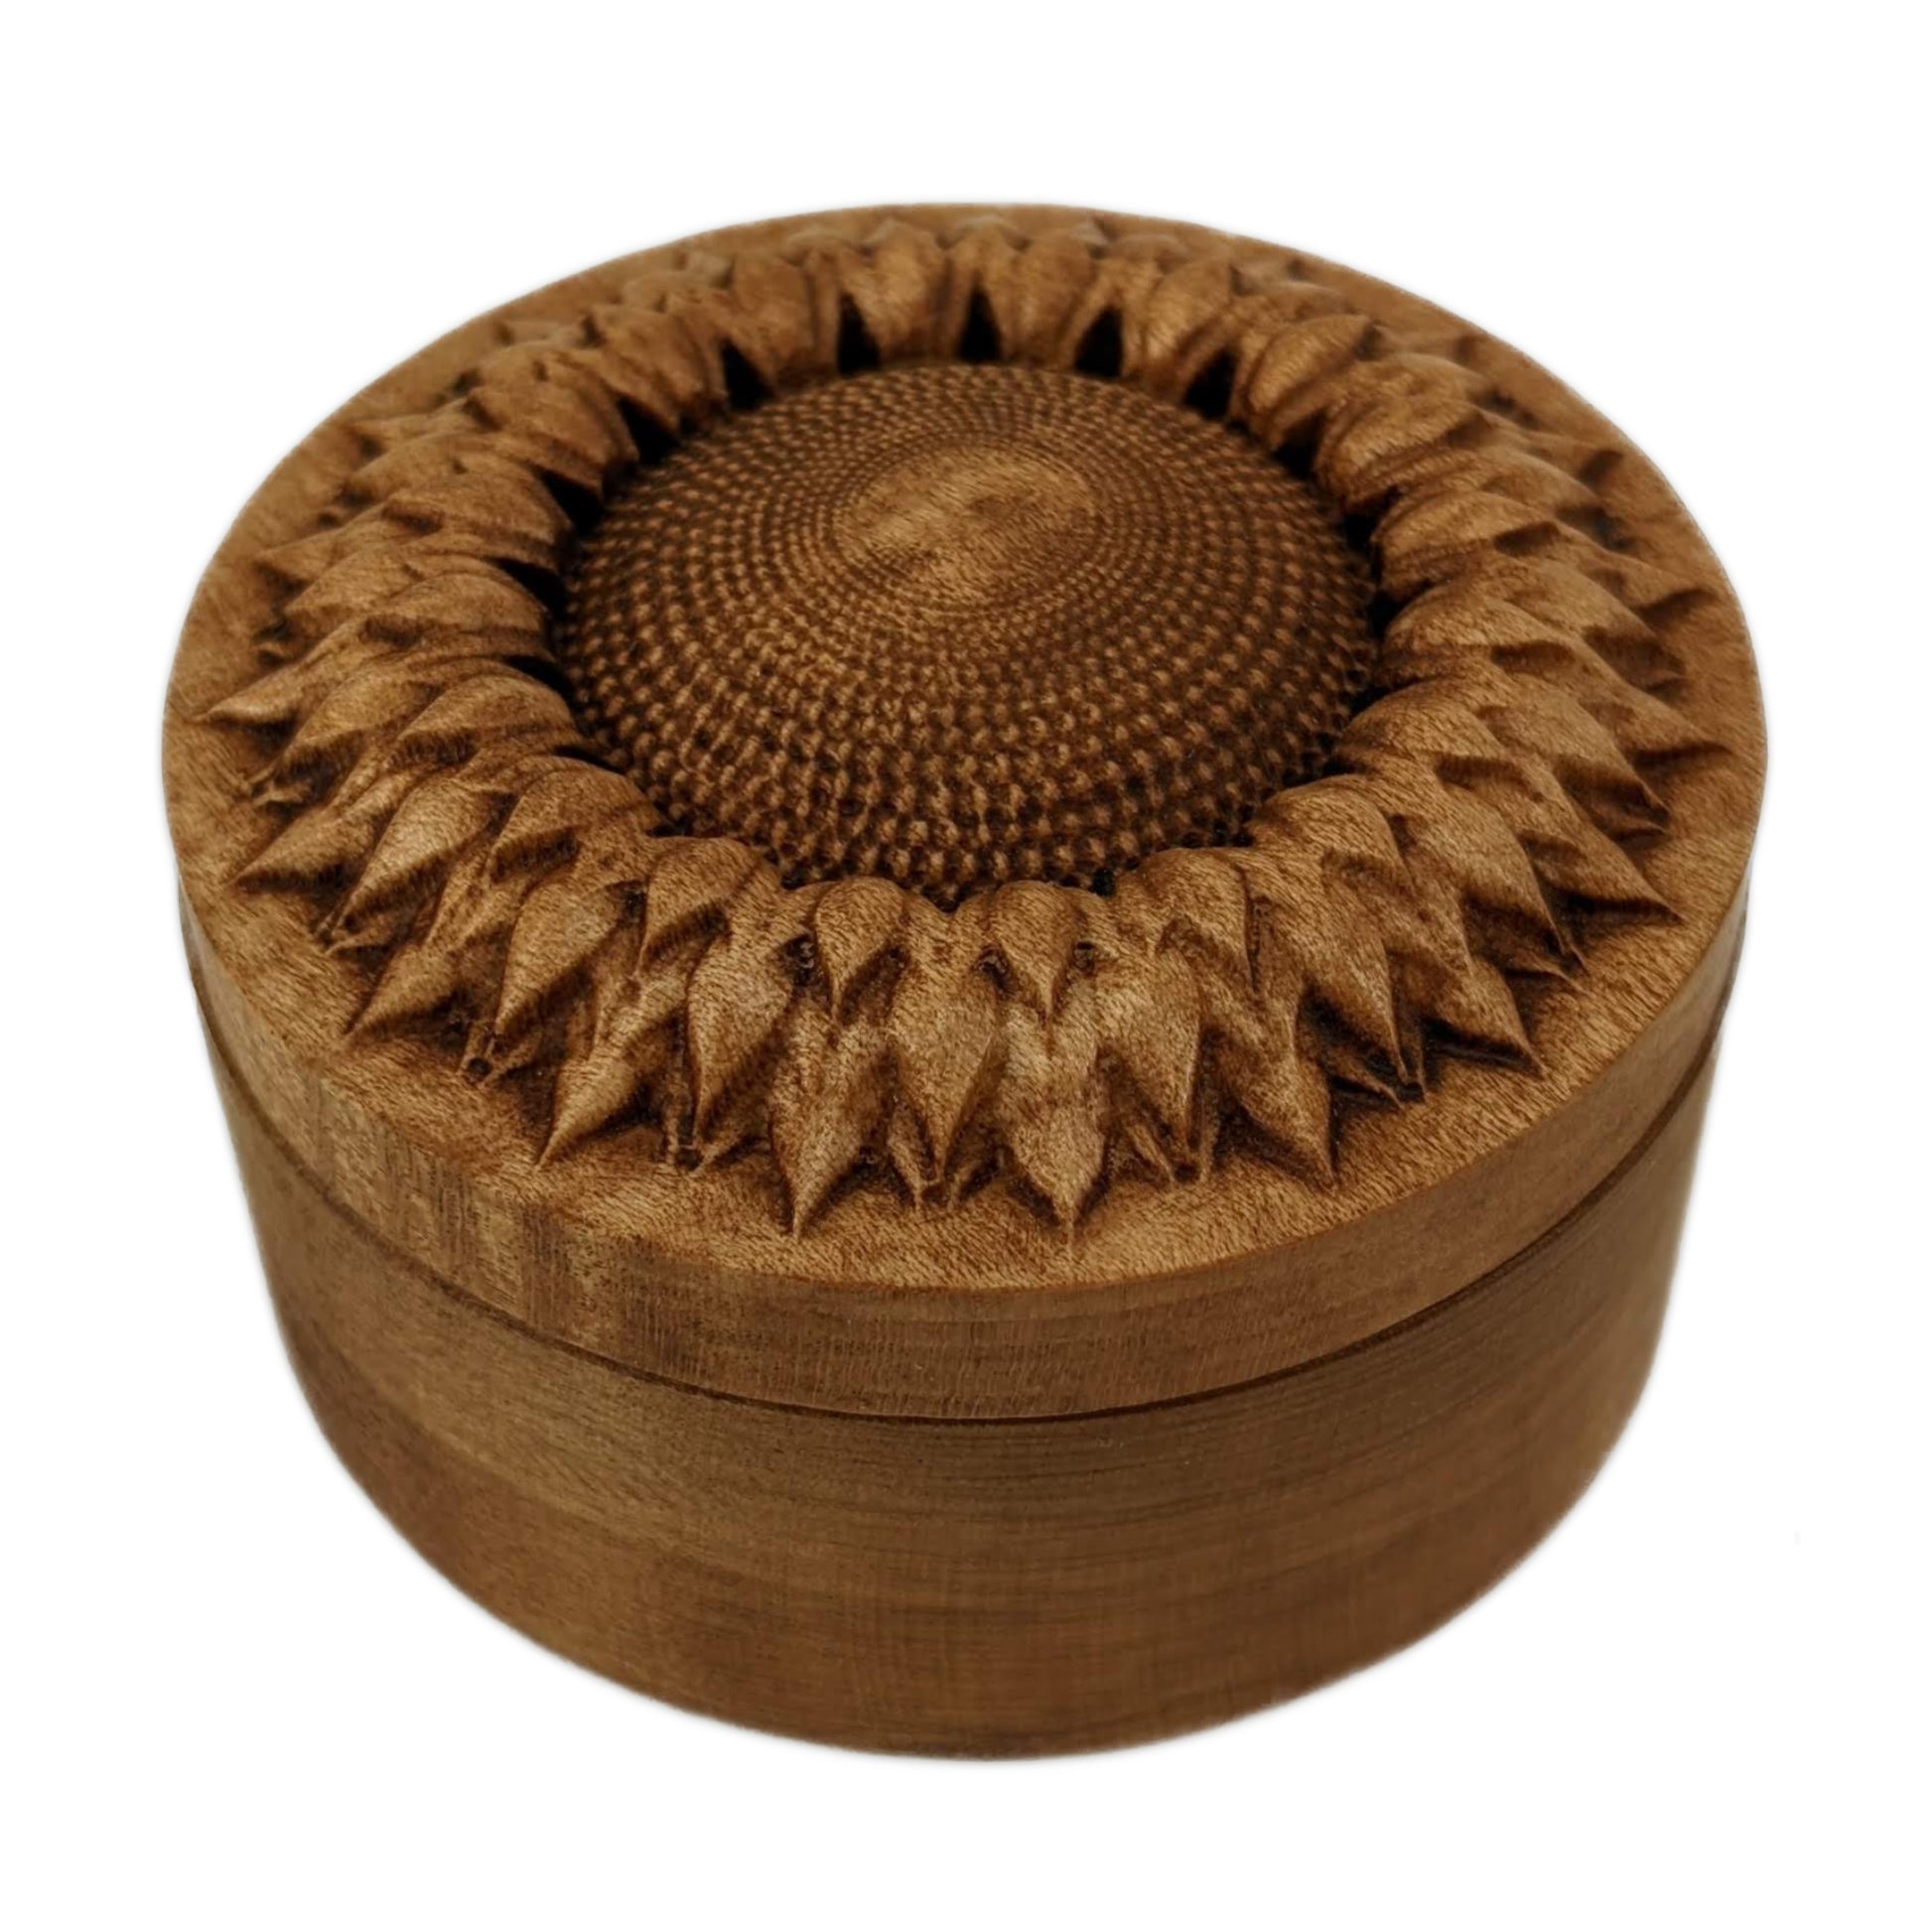 Round wooden box 3D carved with a  top down view of a intricately carved sunflower with dimples covering its center and multiple layered petals circling the center. Made from hard maple wood stained brown against a white background.